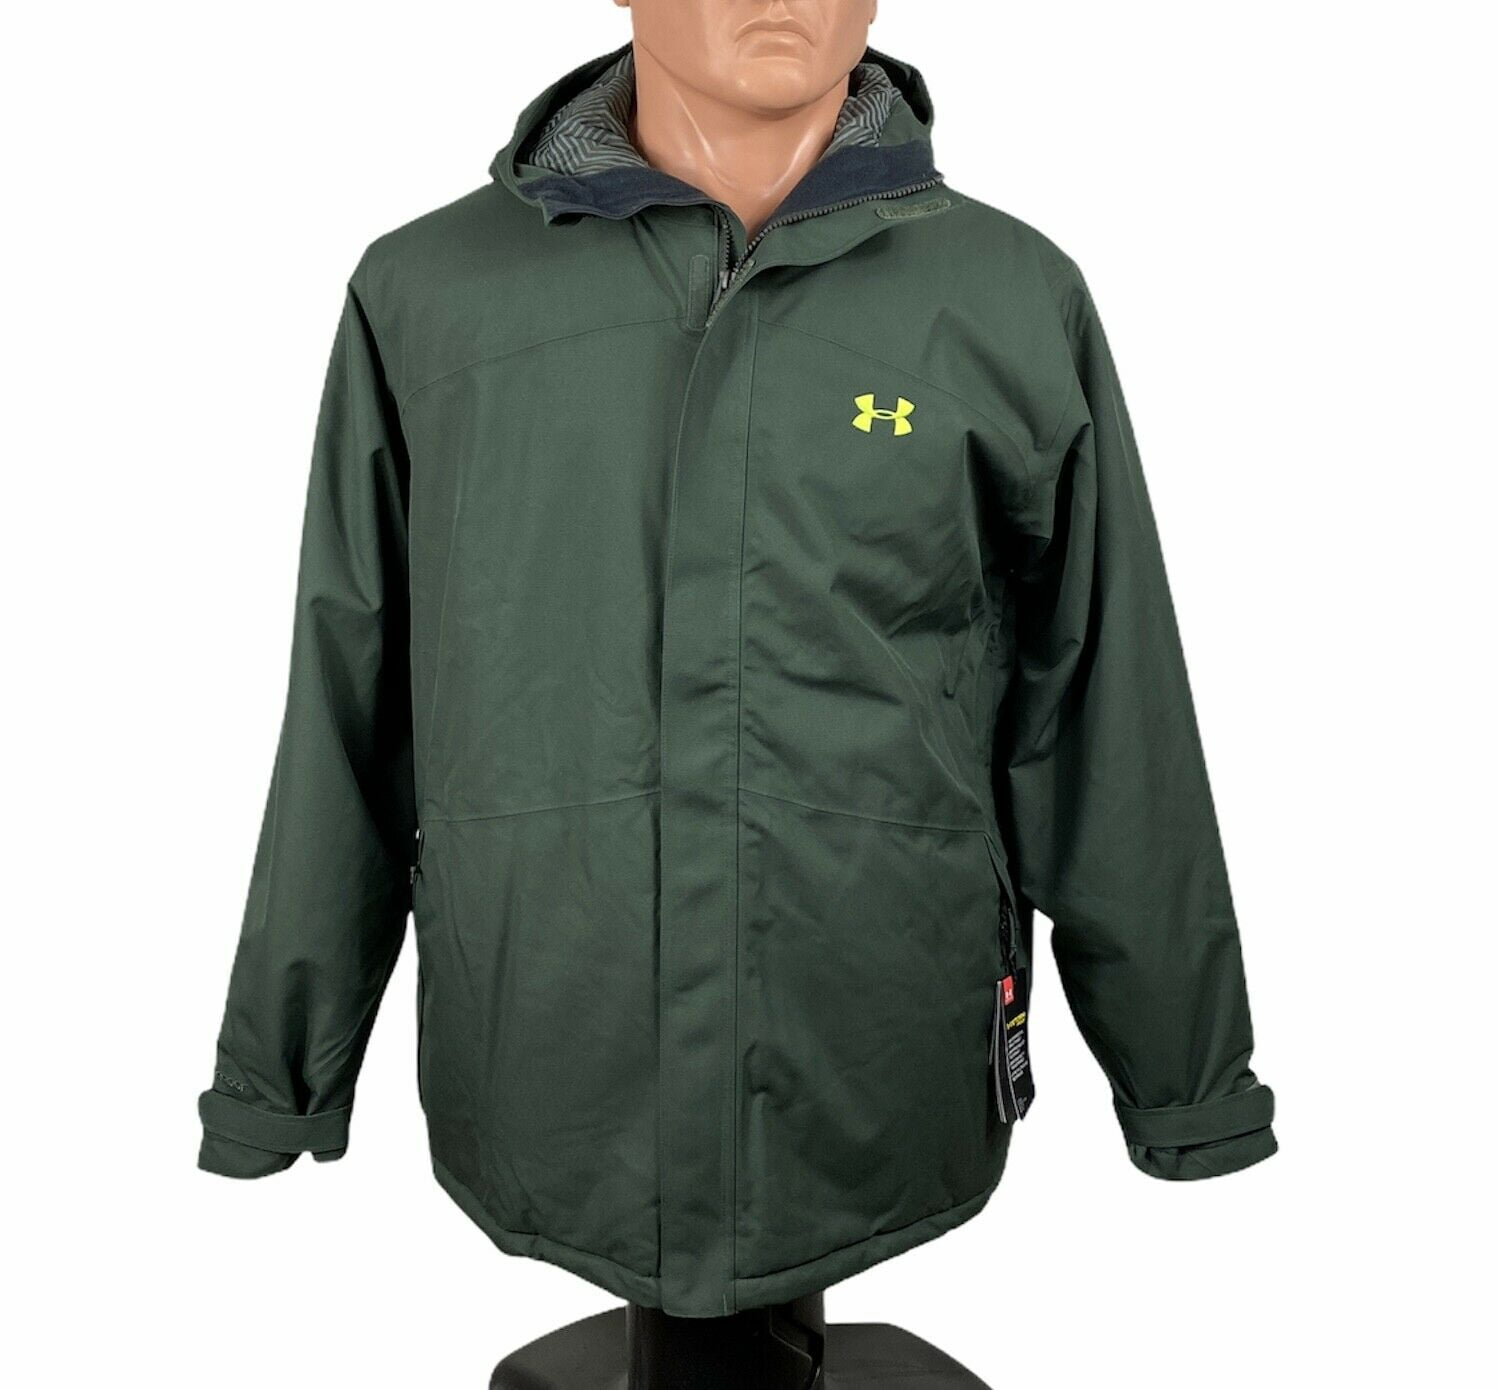 Under Armour Mens Size Jacket Coldgear Storm Insulated Winter UA Coat Green